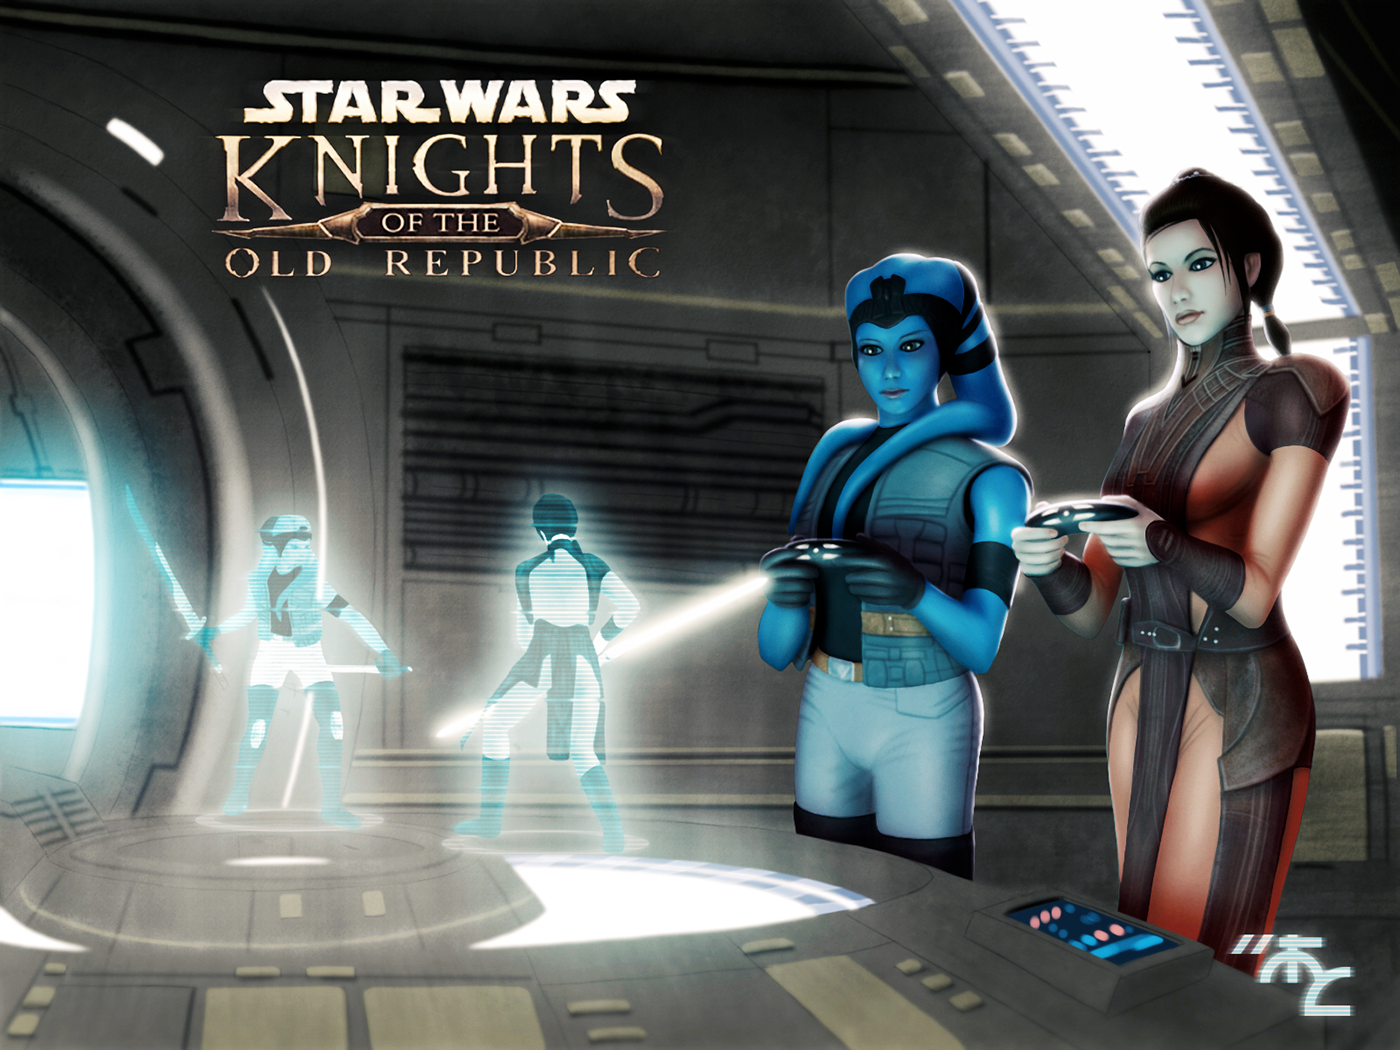 Star wars the knight of the old republic русификатор steam фото 52